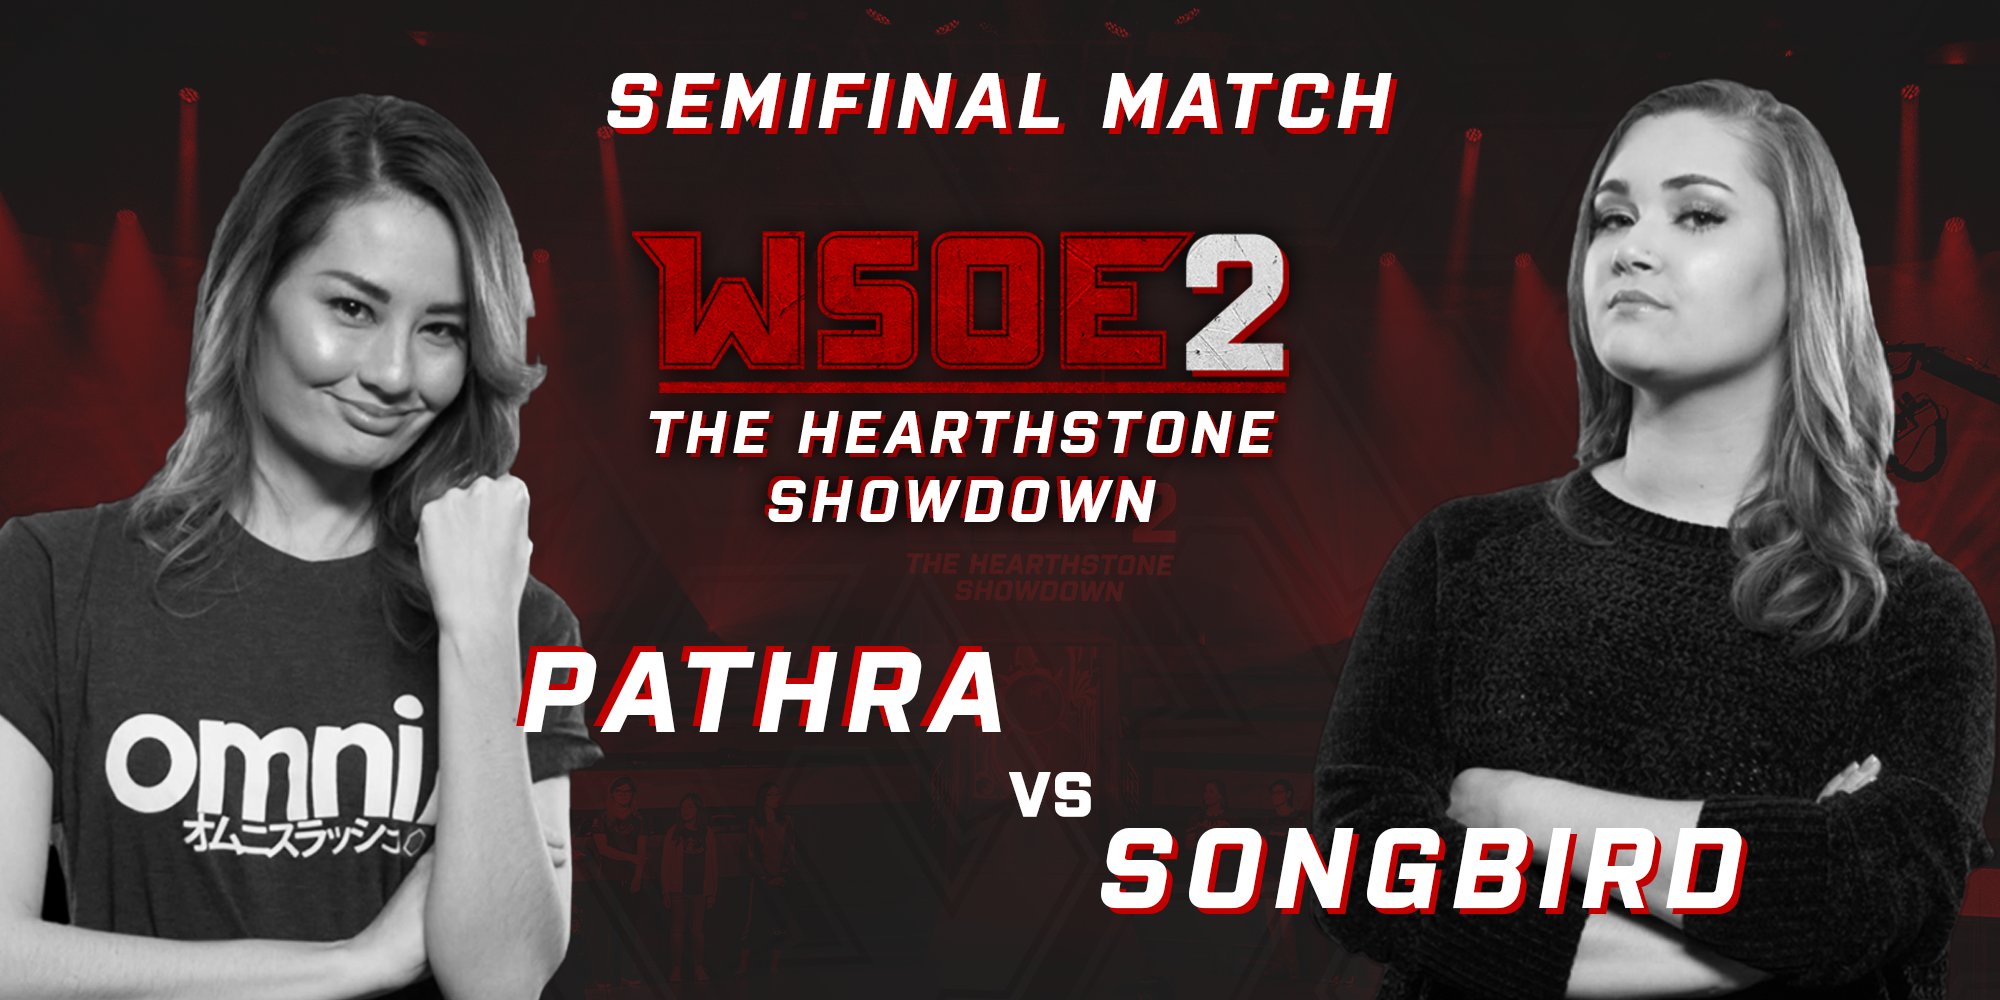 Wsoe Who Will Join Jiadee In The Finals Of Wsoe 2 The Hearthstone Showdown The Semi Final Between Songbird Hs And Pathracadness Is Next Up On T Co Shrym5upg9 Esports Worldshowdownofesports Gaming T Co Ty0cwglipk